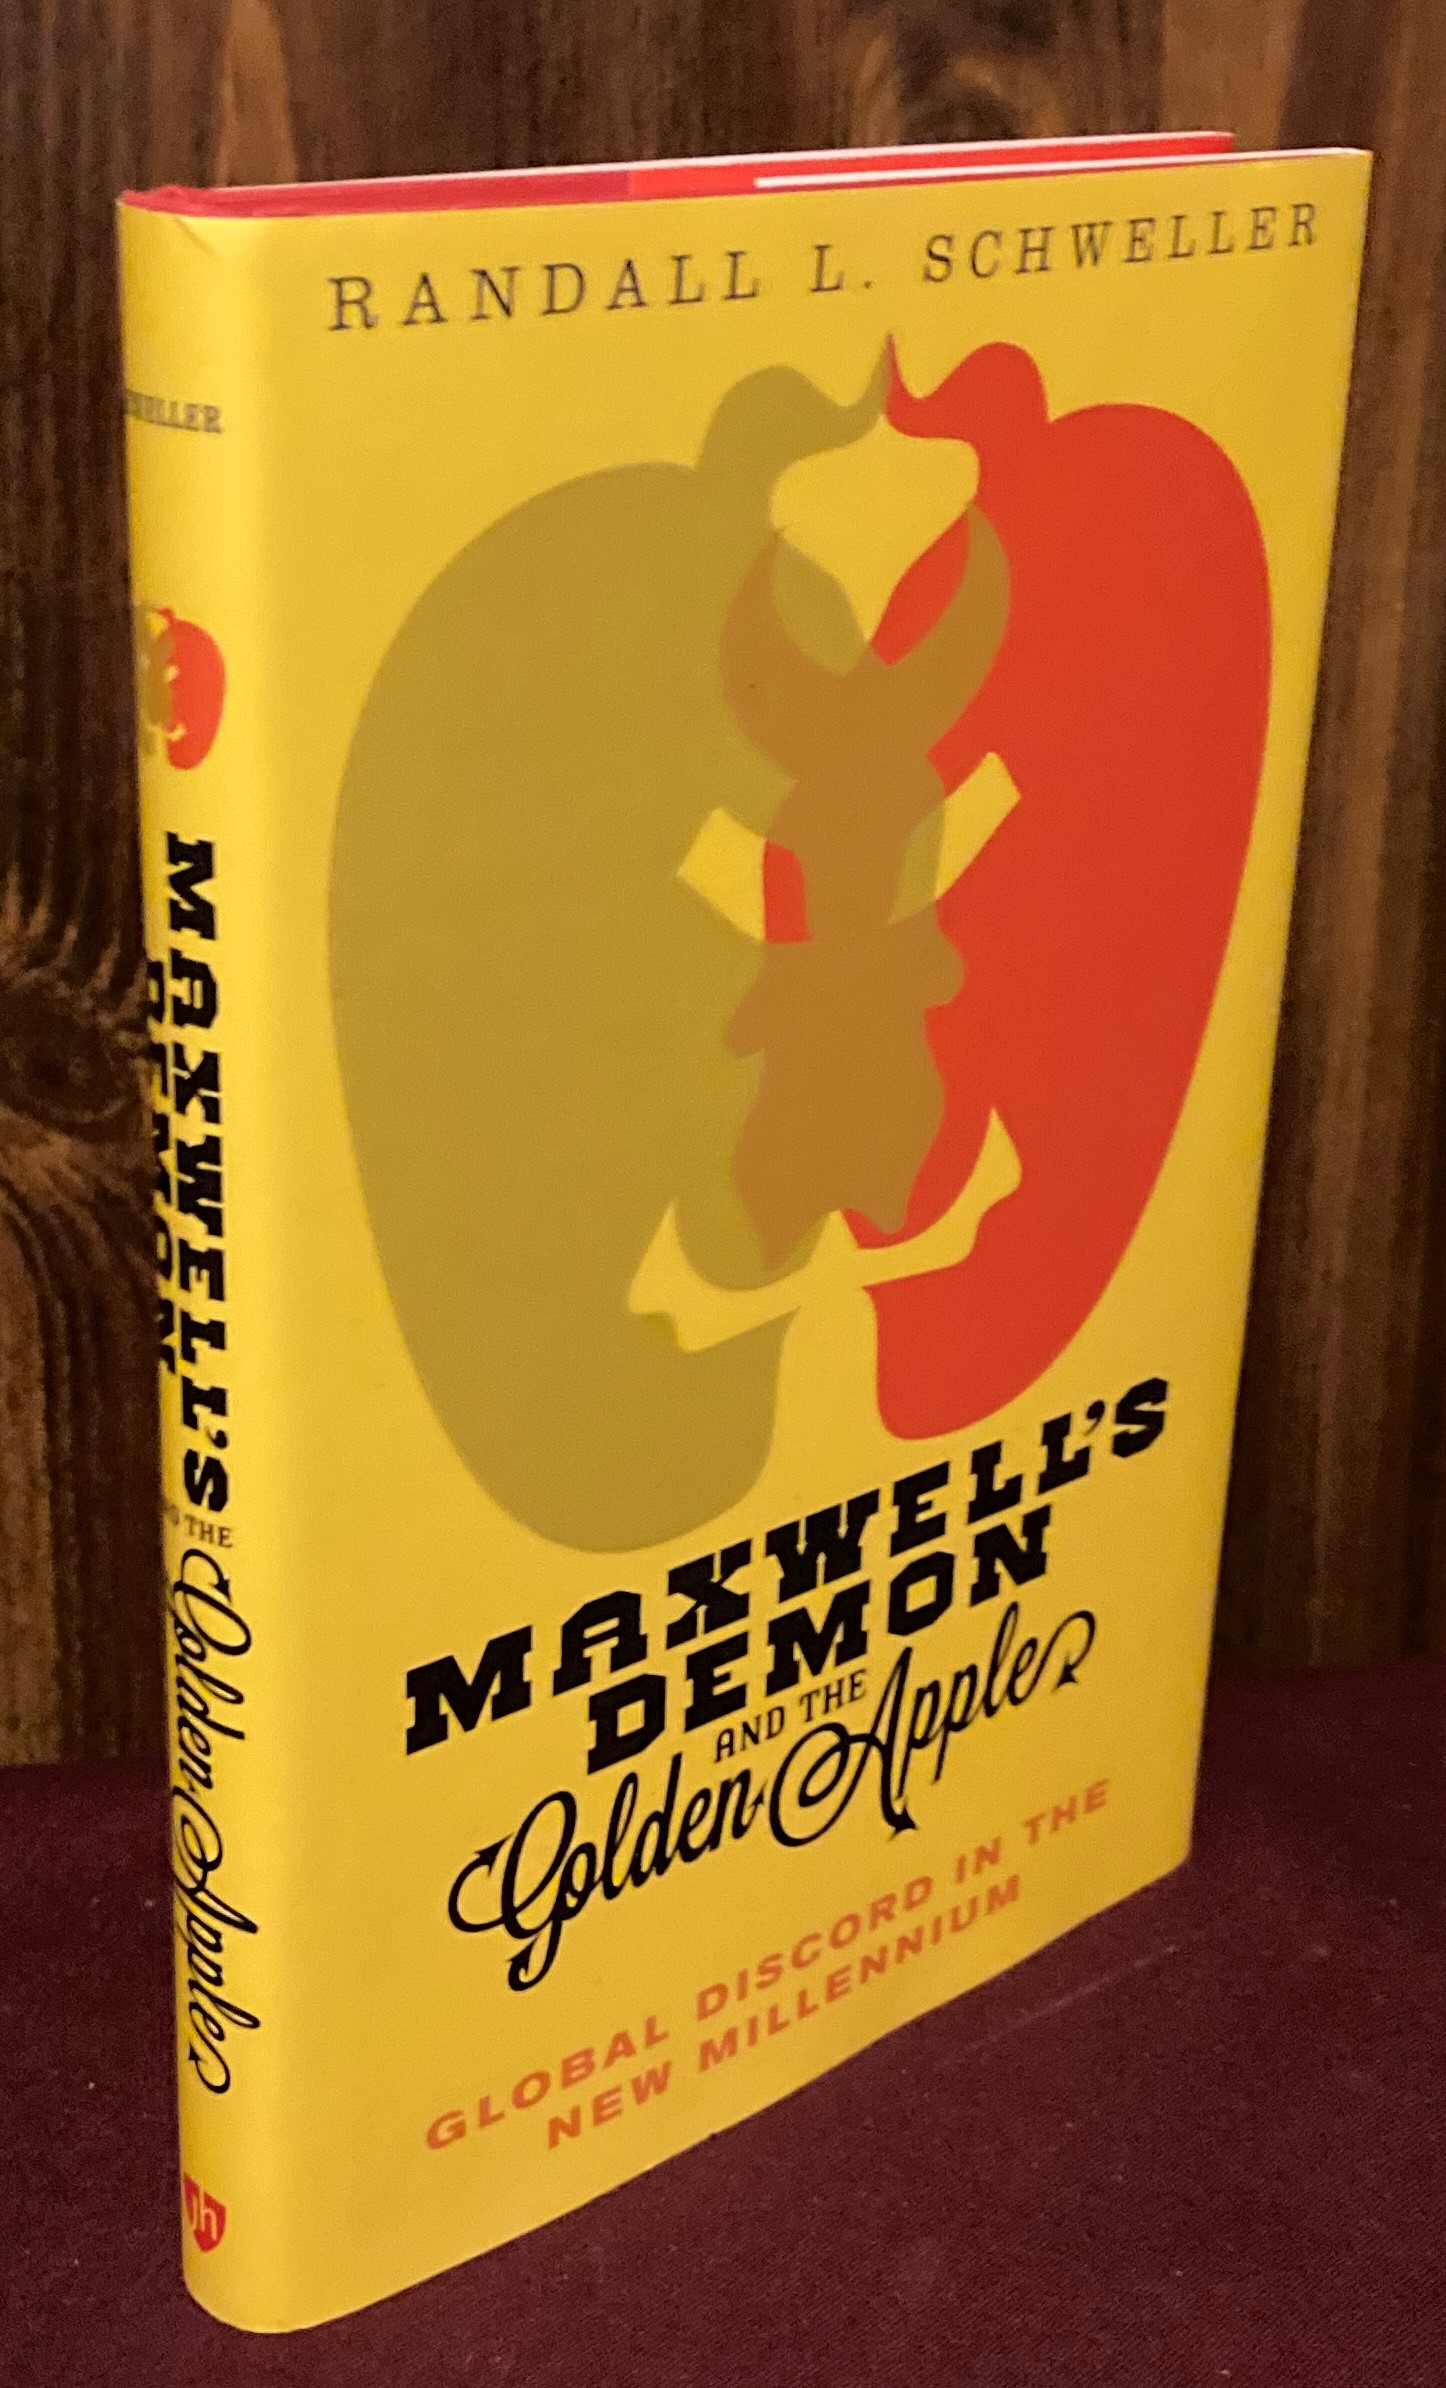 Maxwell's Demon and the Golden Apple